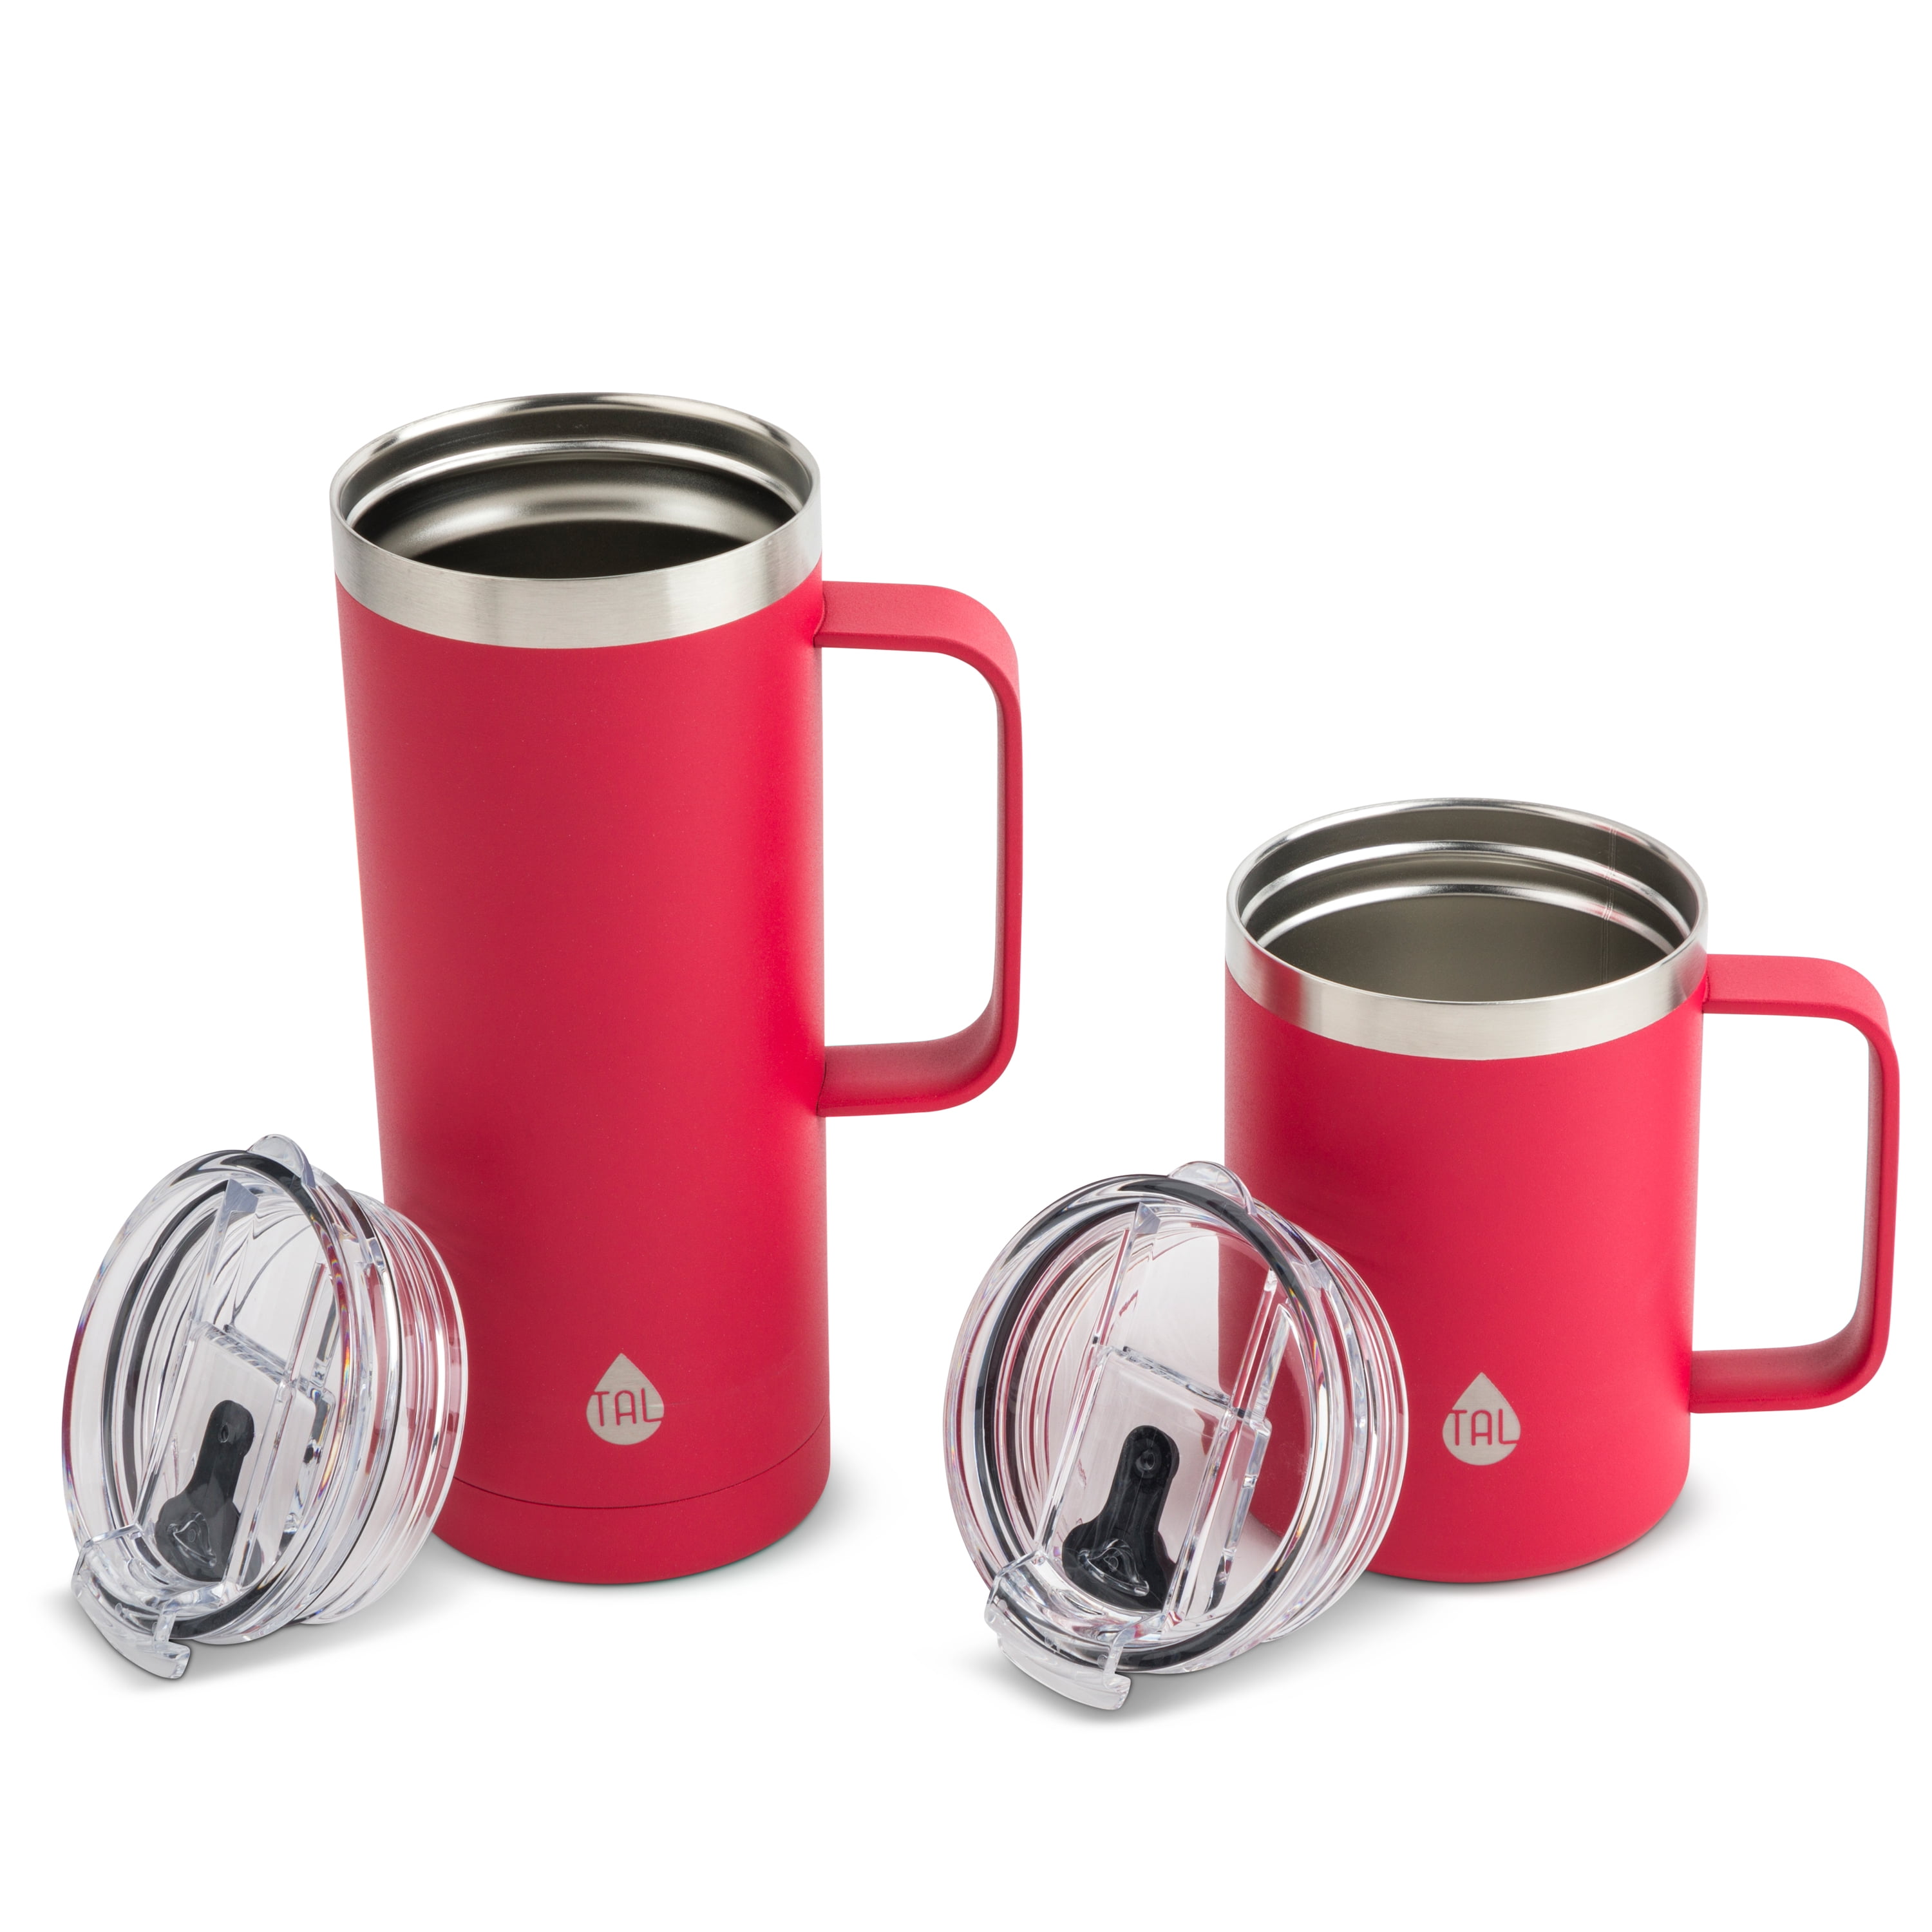 TAL Stainless Steel Mountaineer Coffee Mug 2 Pack, 20 fl oz and 12 fl oz,  White